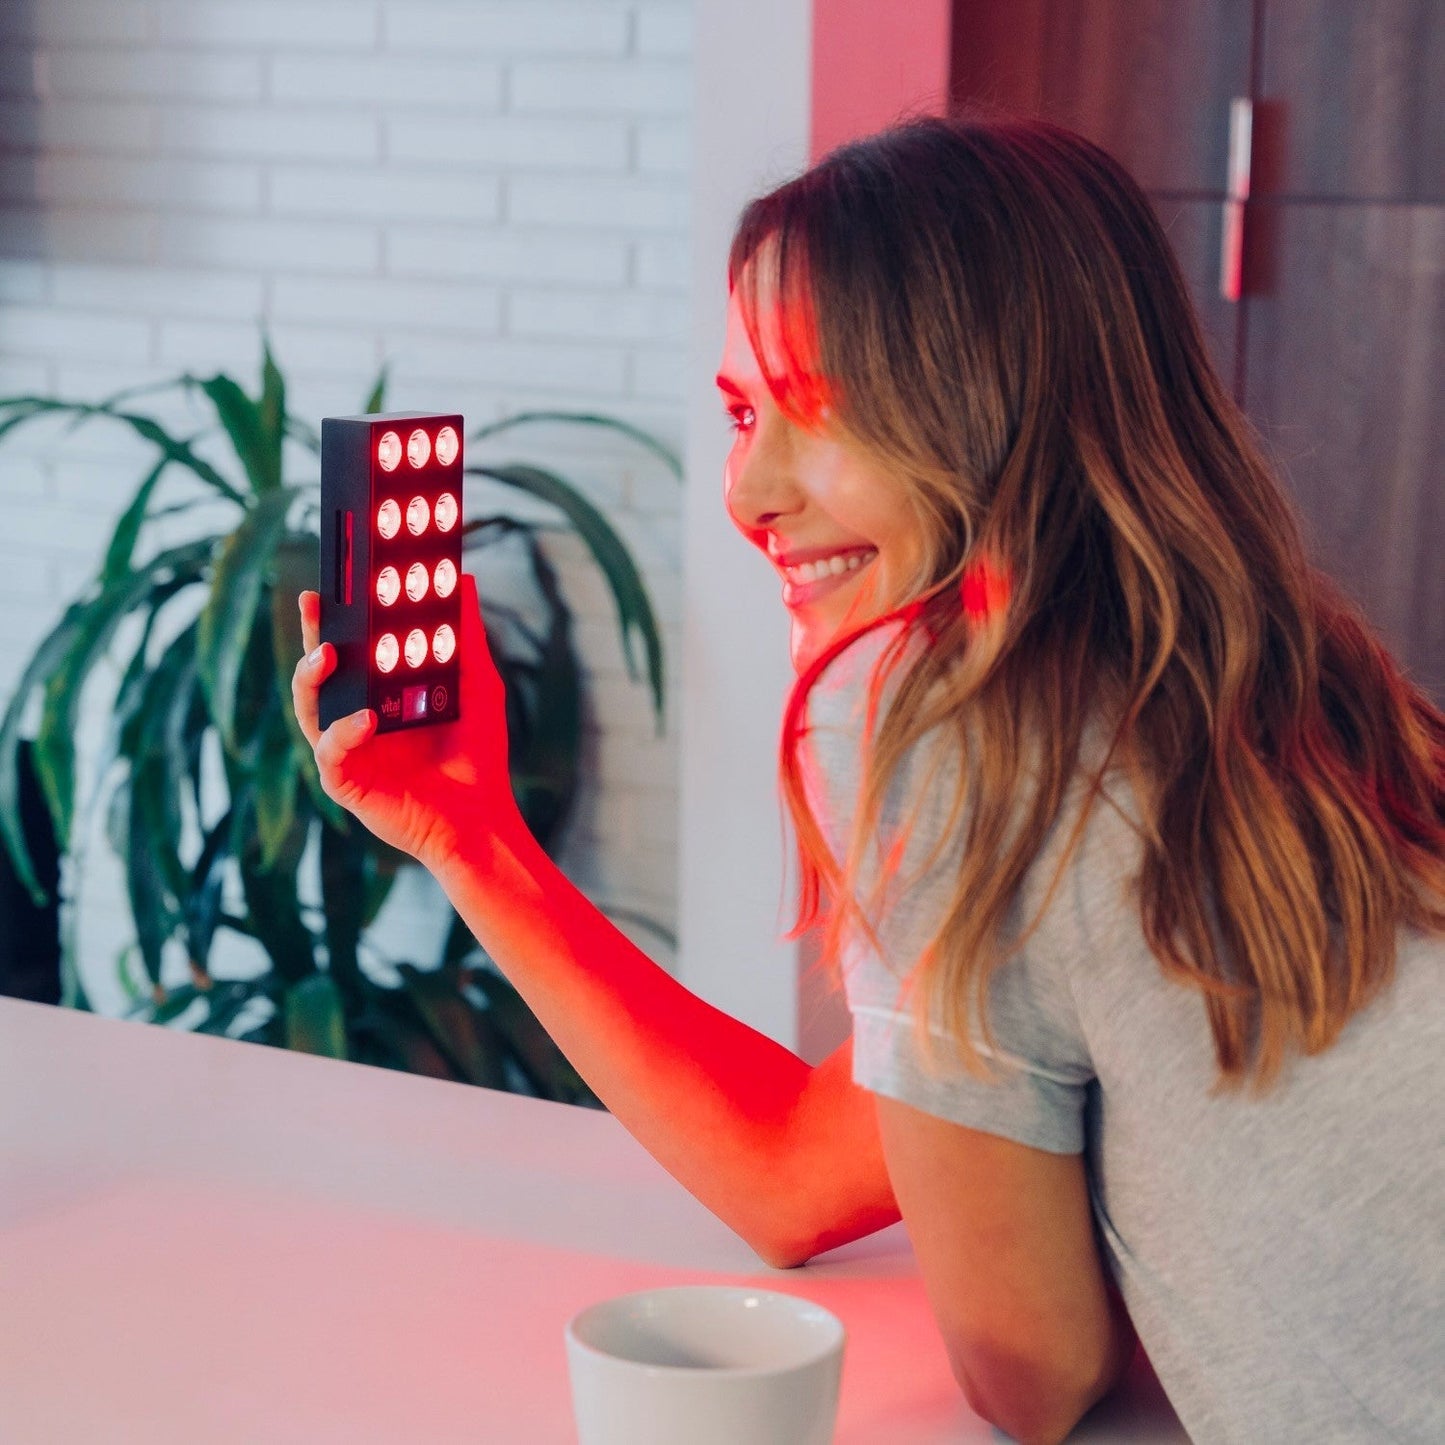 Handheld Red Light Therapy - Uprium